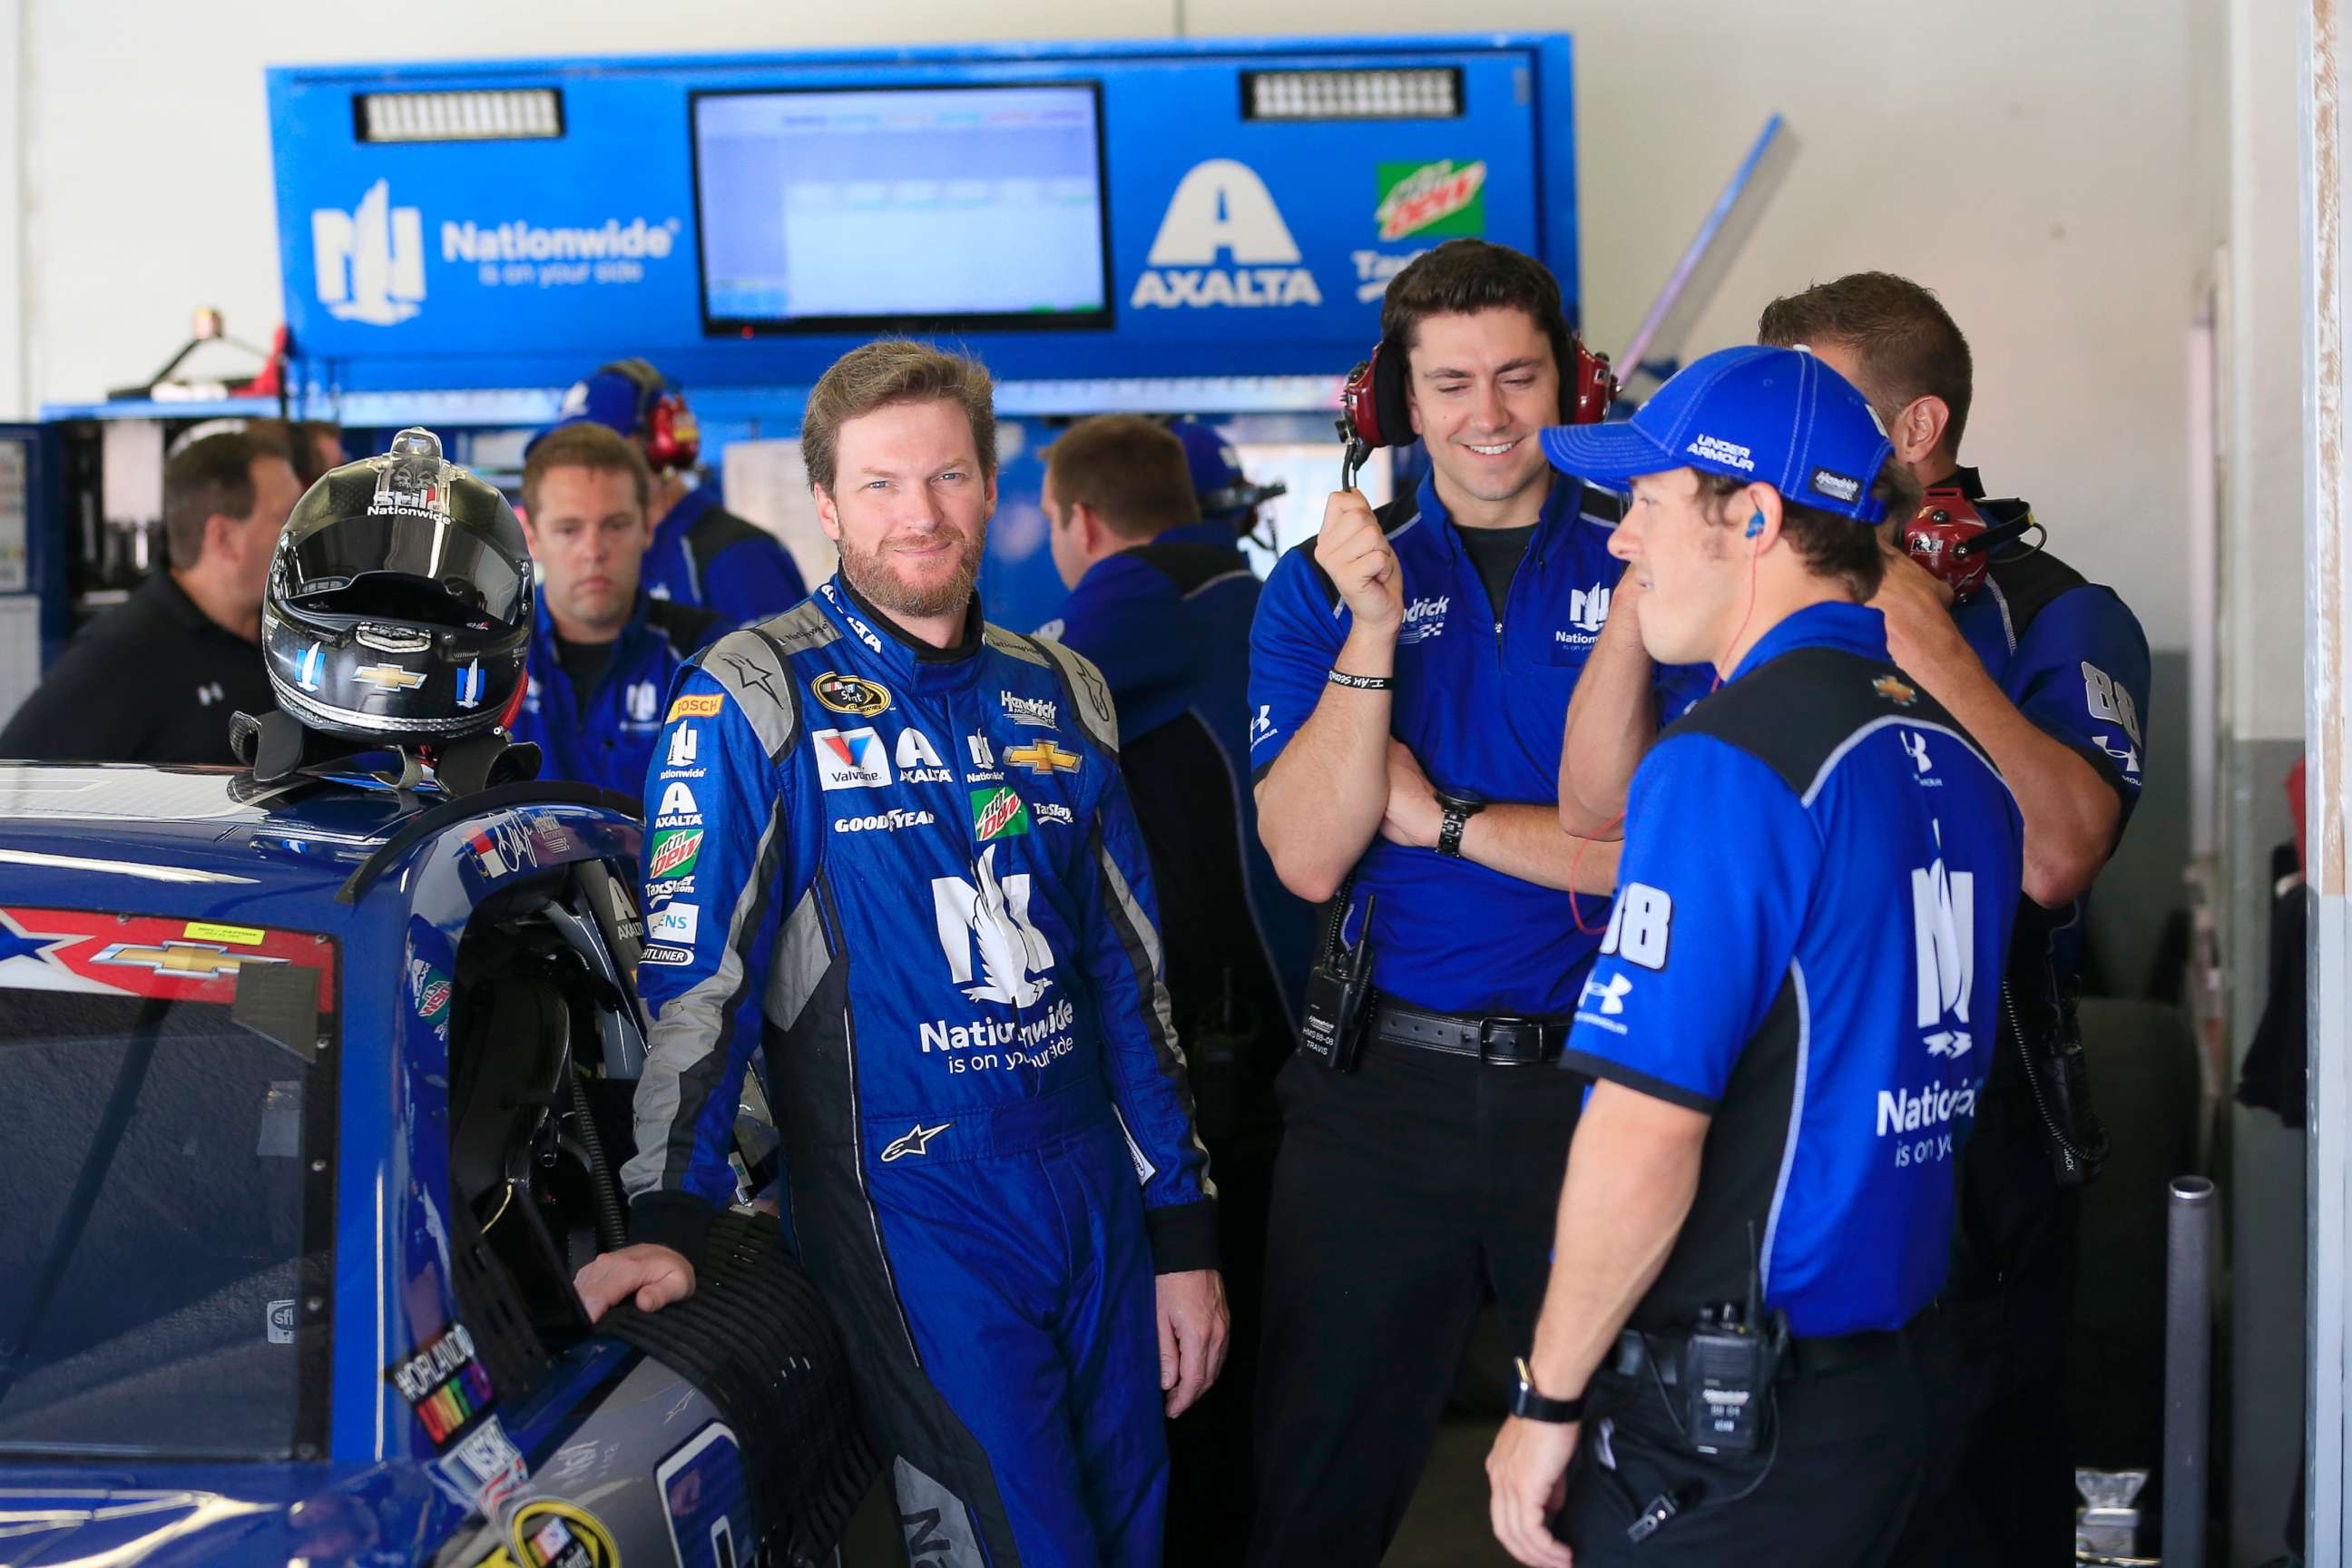 PHOTO: In this file photo, Dale Earnhardt Jr., driver of the #88 Nationwide Chevrolet, talks to his crew in the garage at Daytona International Speedway, July 1, 2016, in Daytona Beach, Fla.